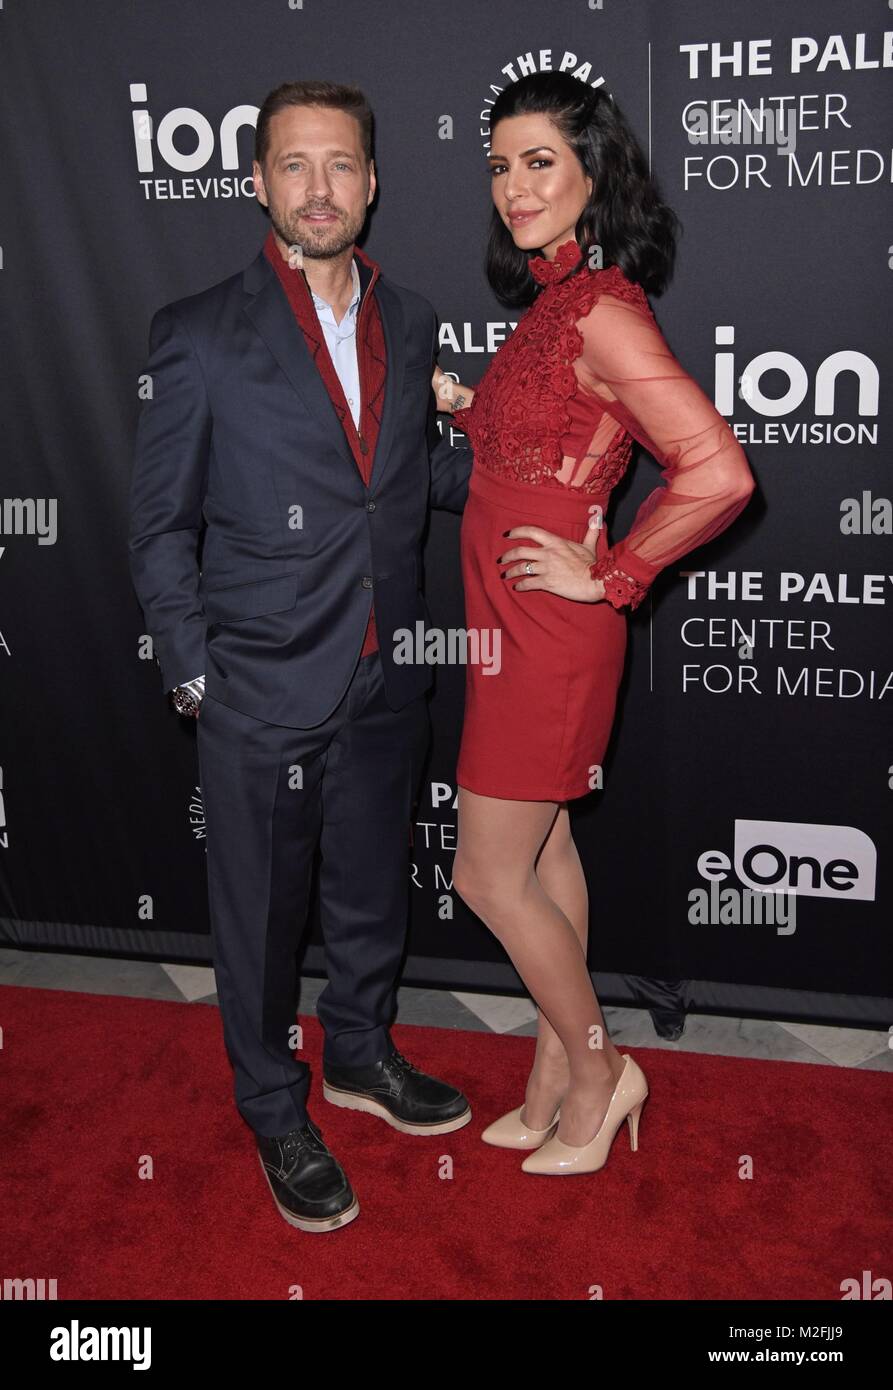 New York, NY, USA. 7th Feb, 2018. Jason Priestley, Cindy Sampson at arrivals for ION Television's PRIVATE EYES Preview Screening and Discussion, The Paley Center for Media, New York, NY February 7, 2018. Credit: Derek Storm/Everett Collection/Alamy Live News Stock Photo